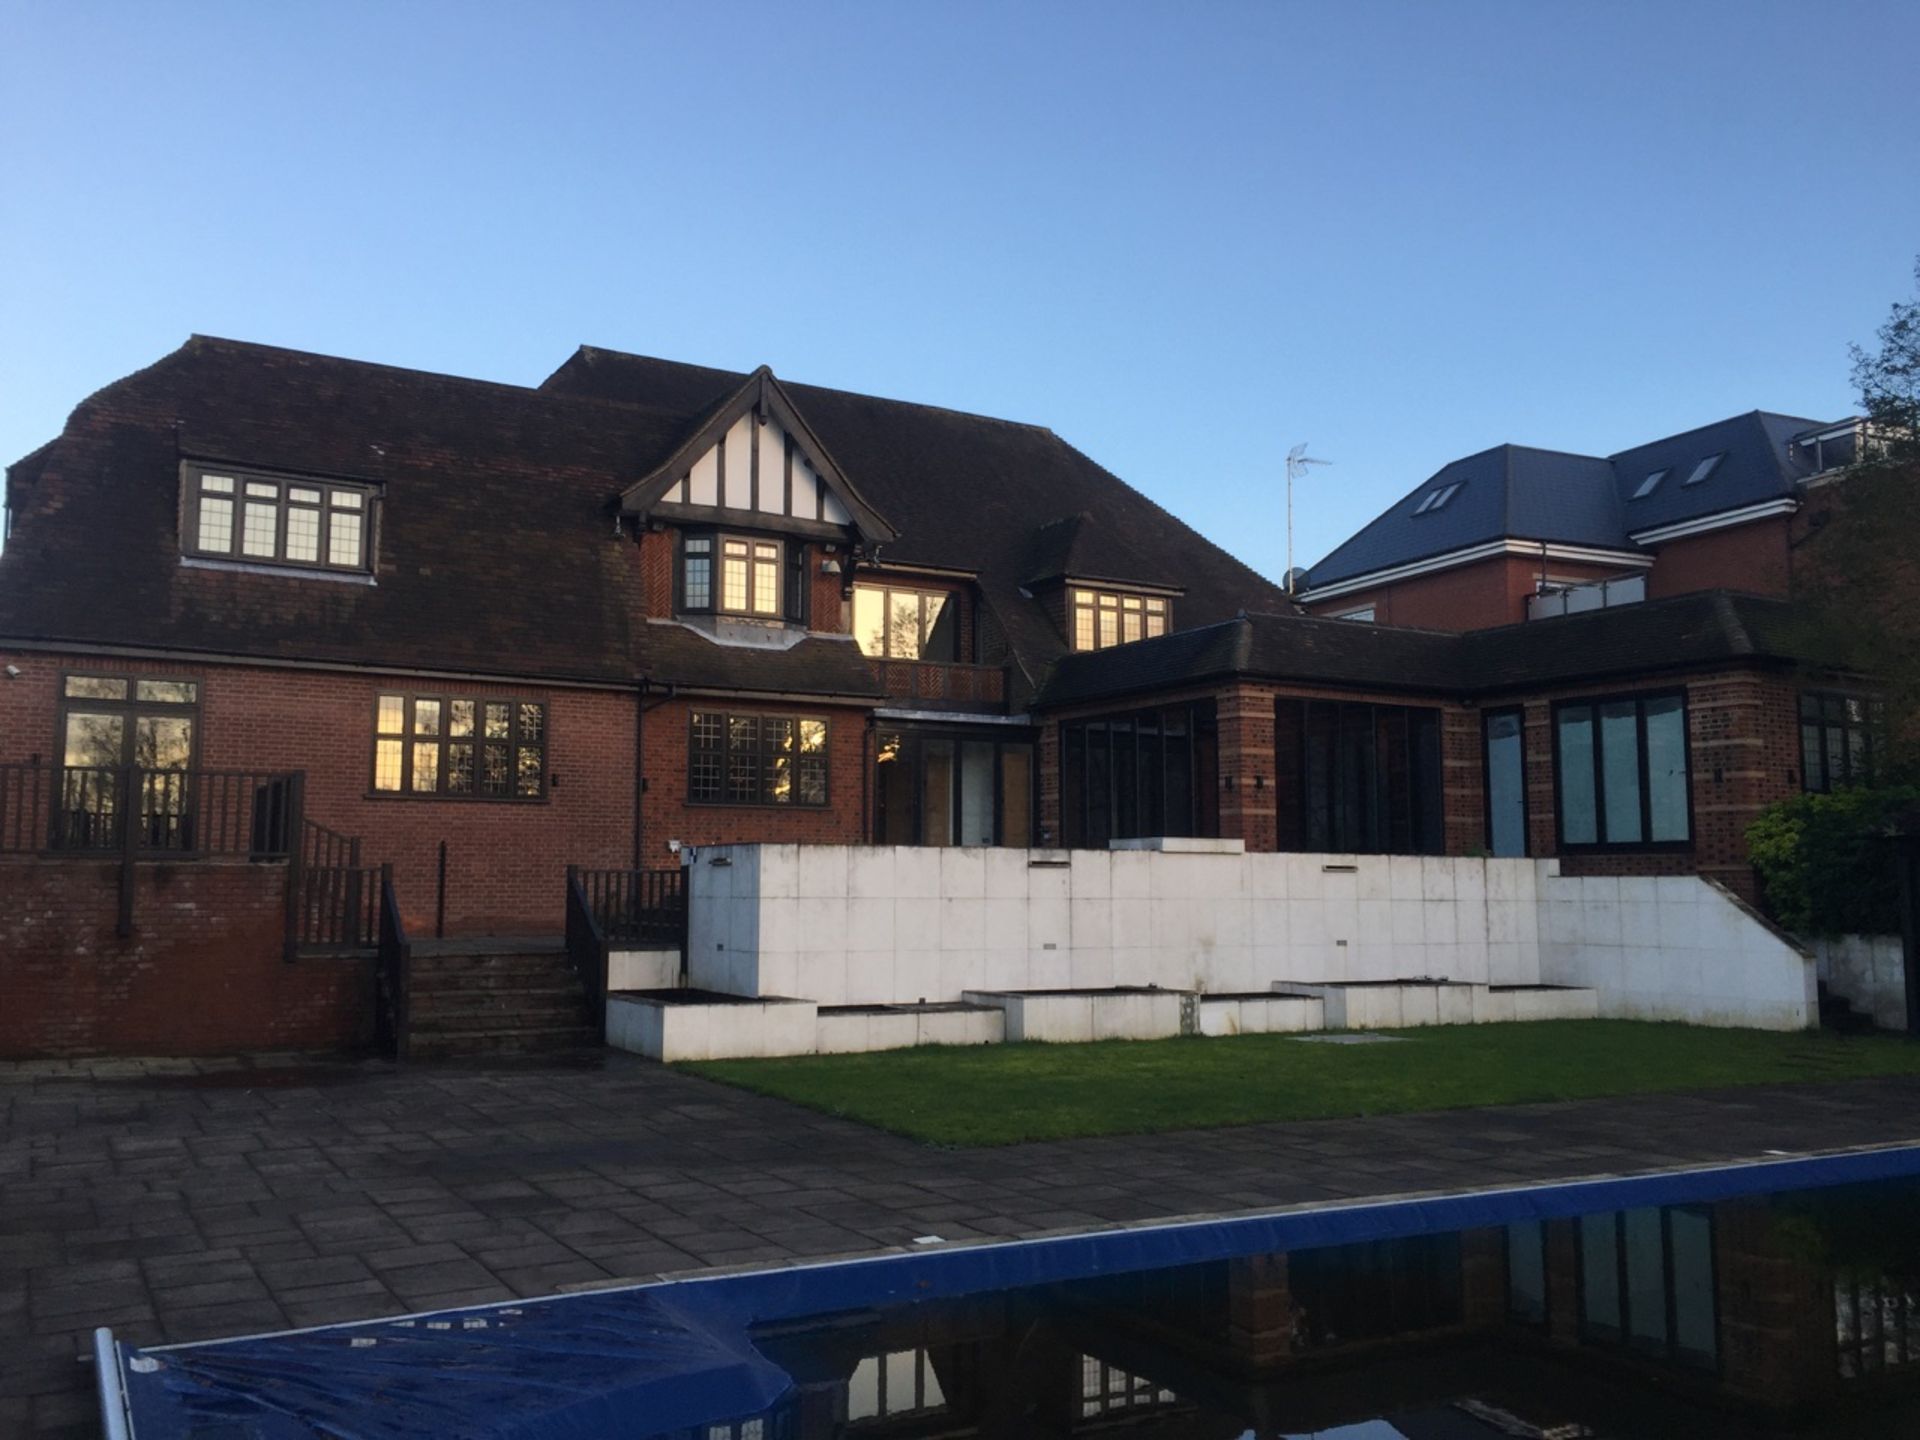 Auction Of Luxury House Contents Inc Plant (Pool), Heating, Roof Tiles, Doors etc...